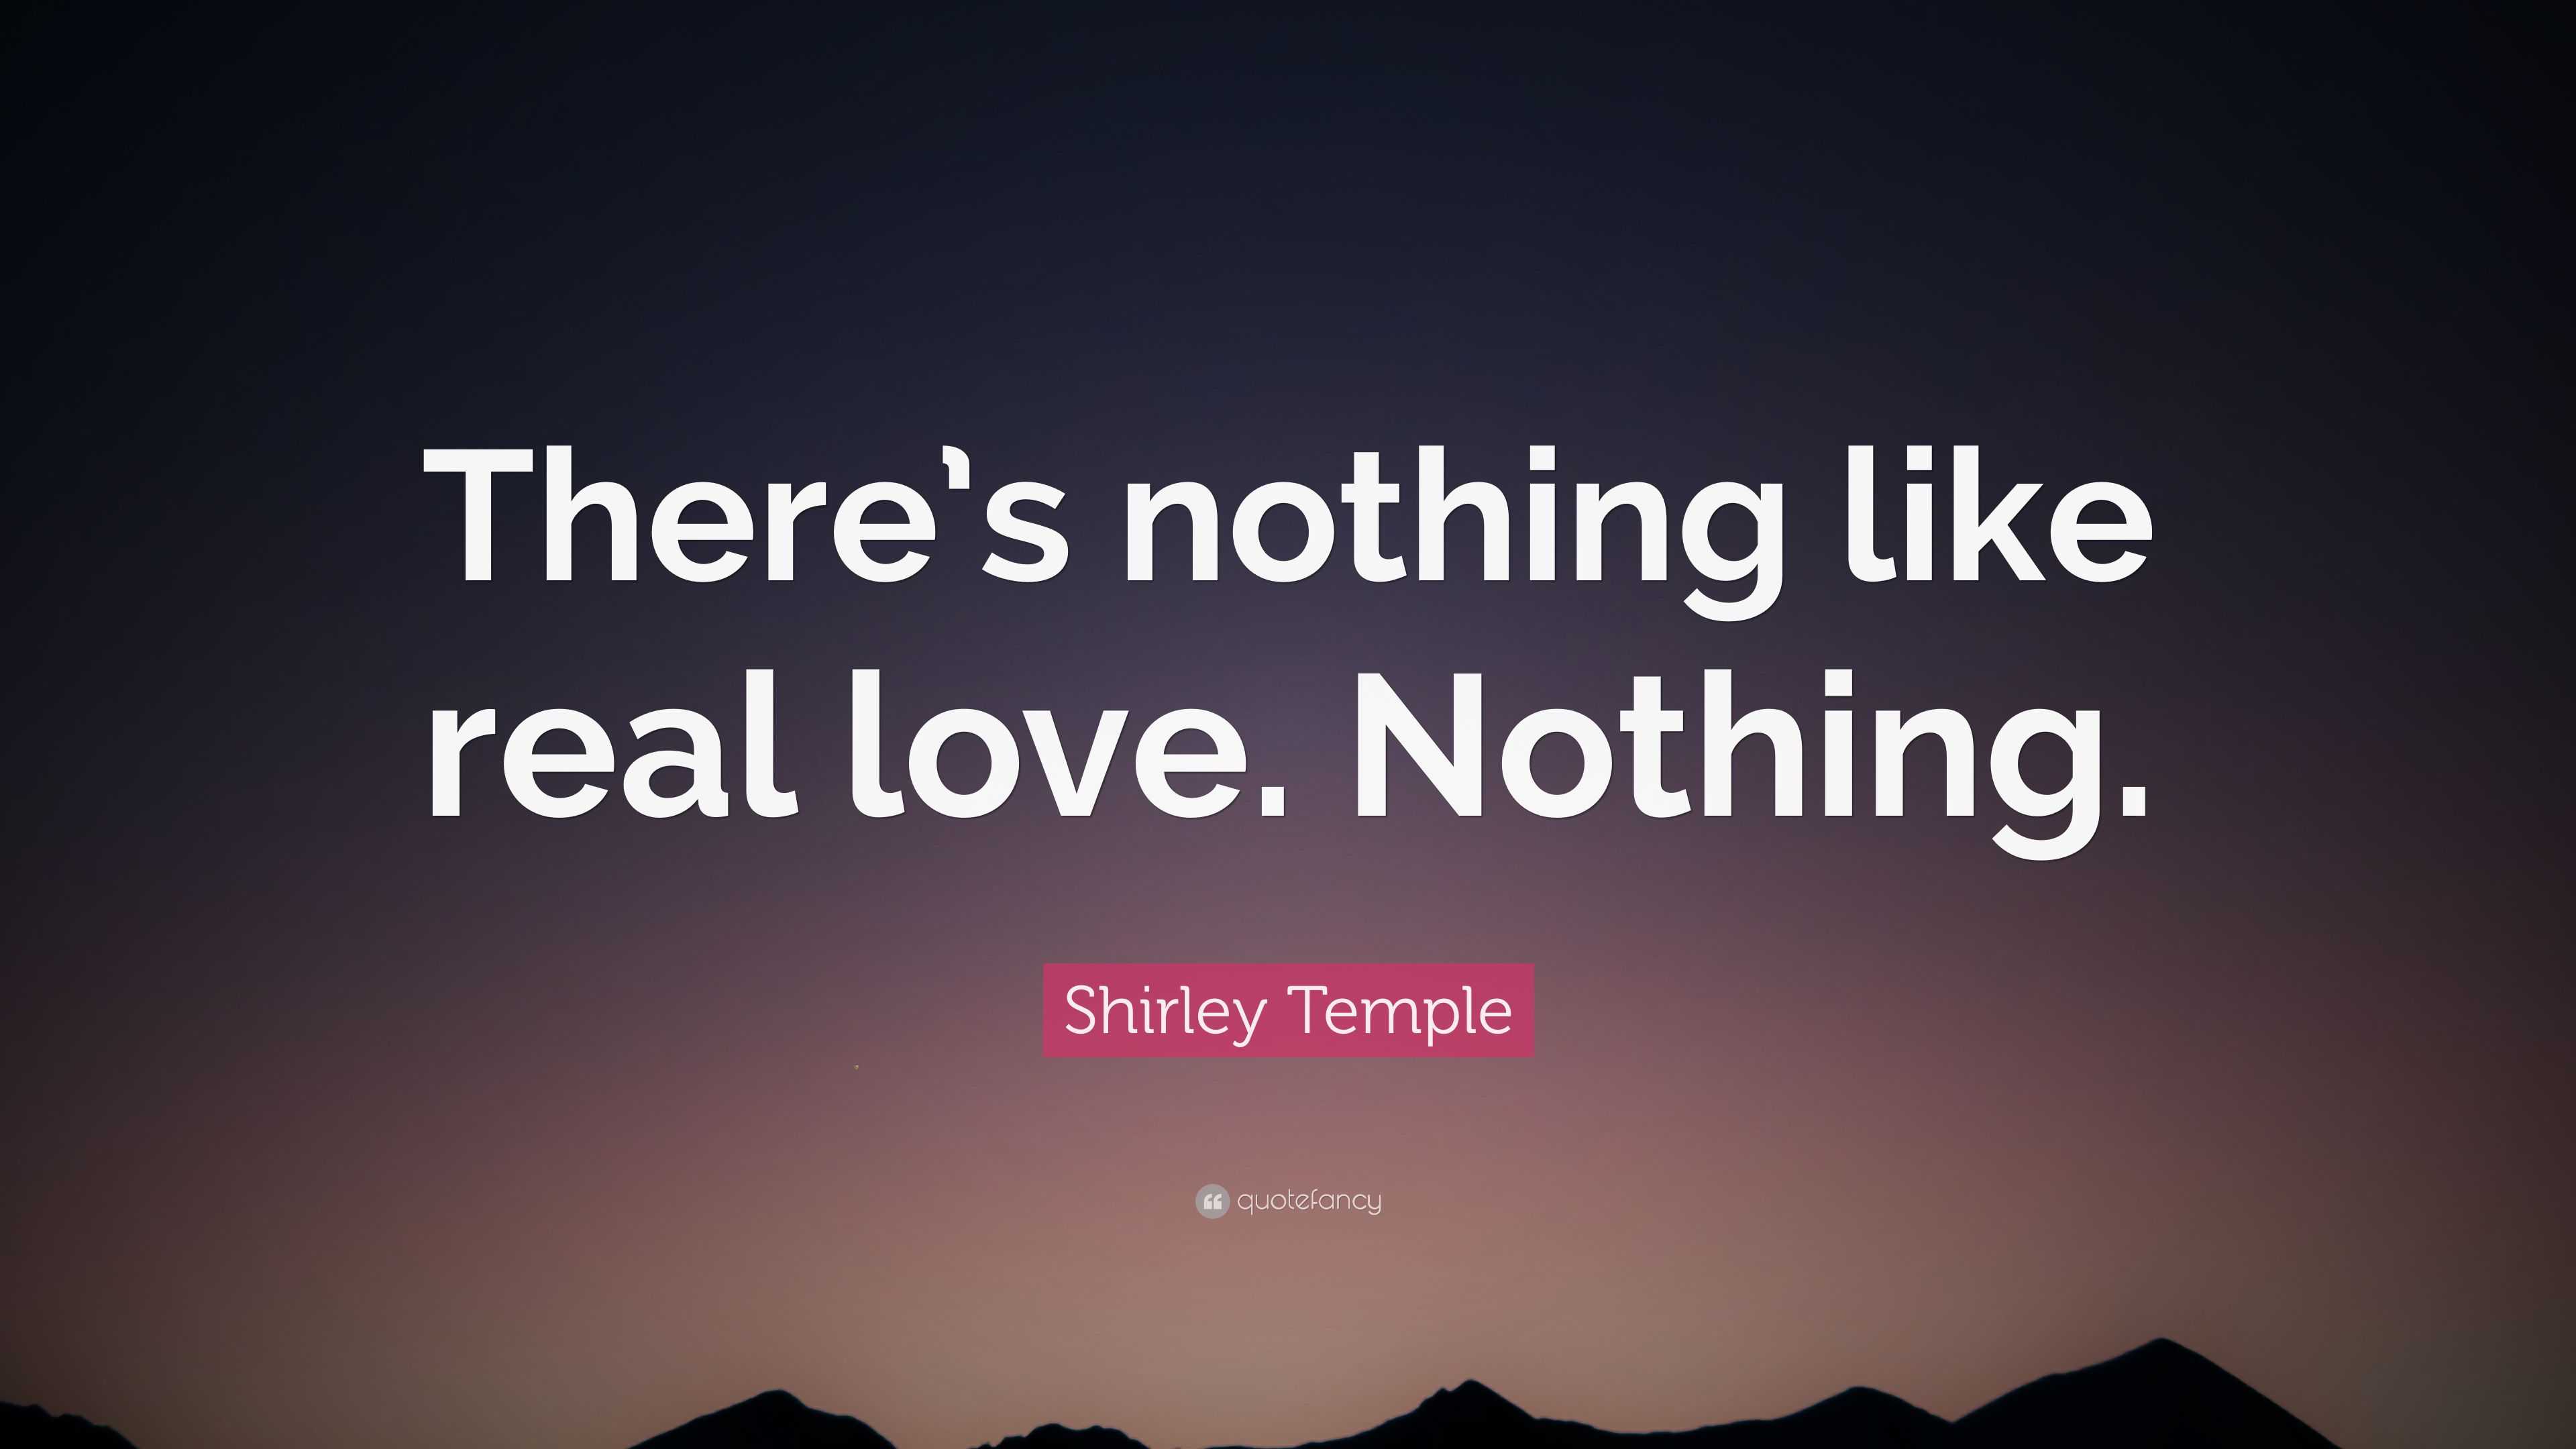 Shirley Temple Quote: “There's nothing like real love. Nothing.”